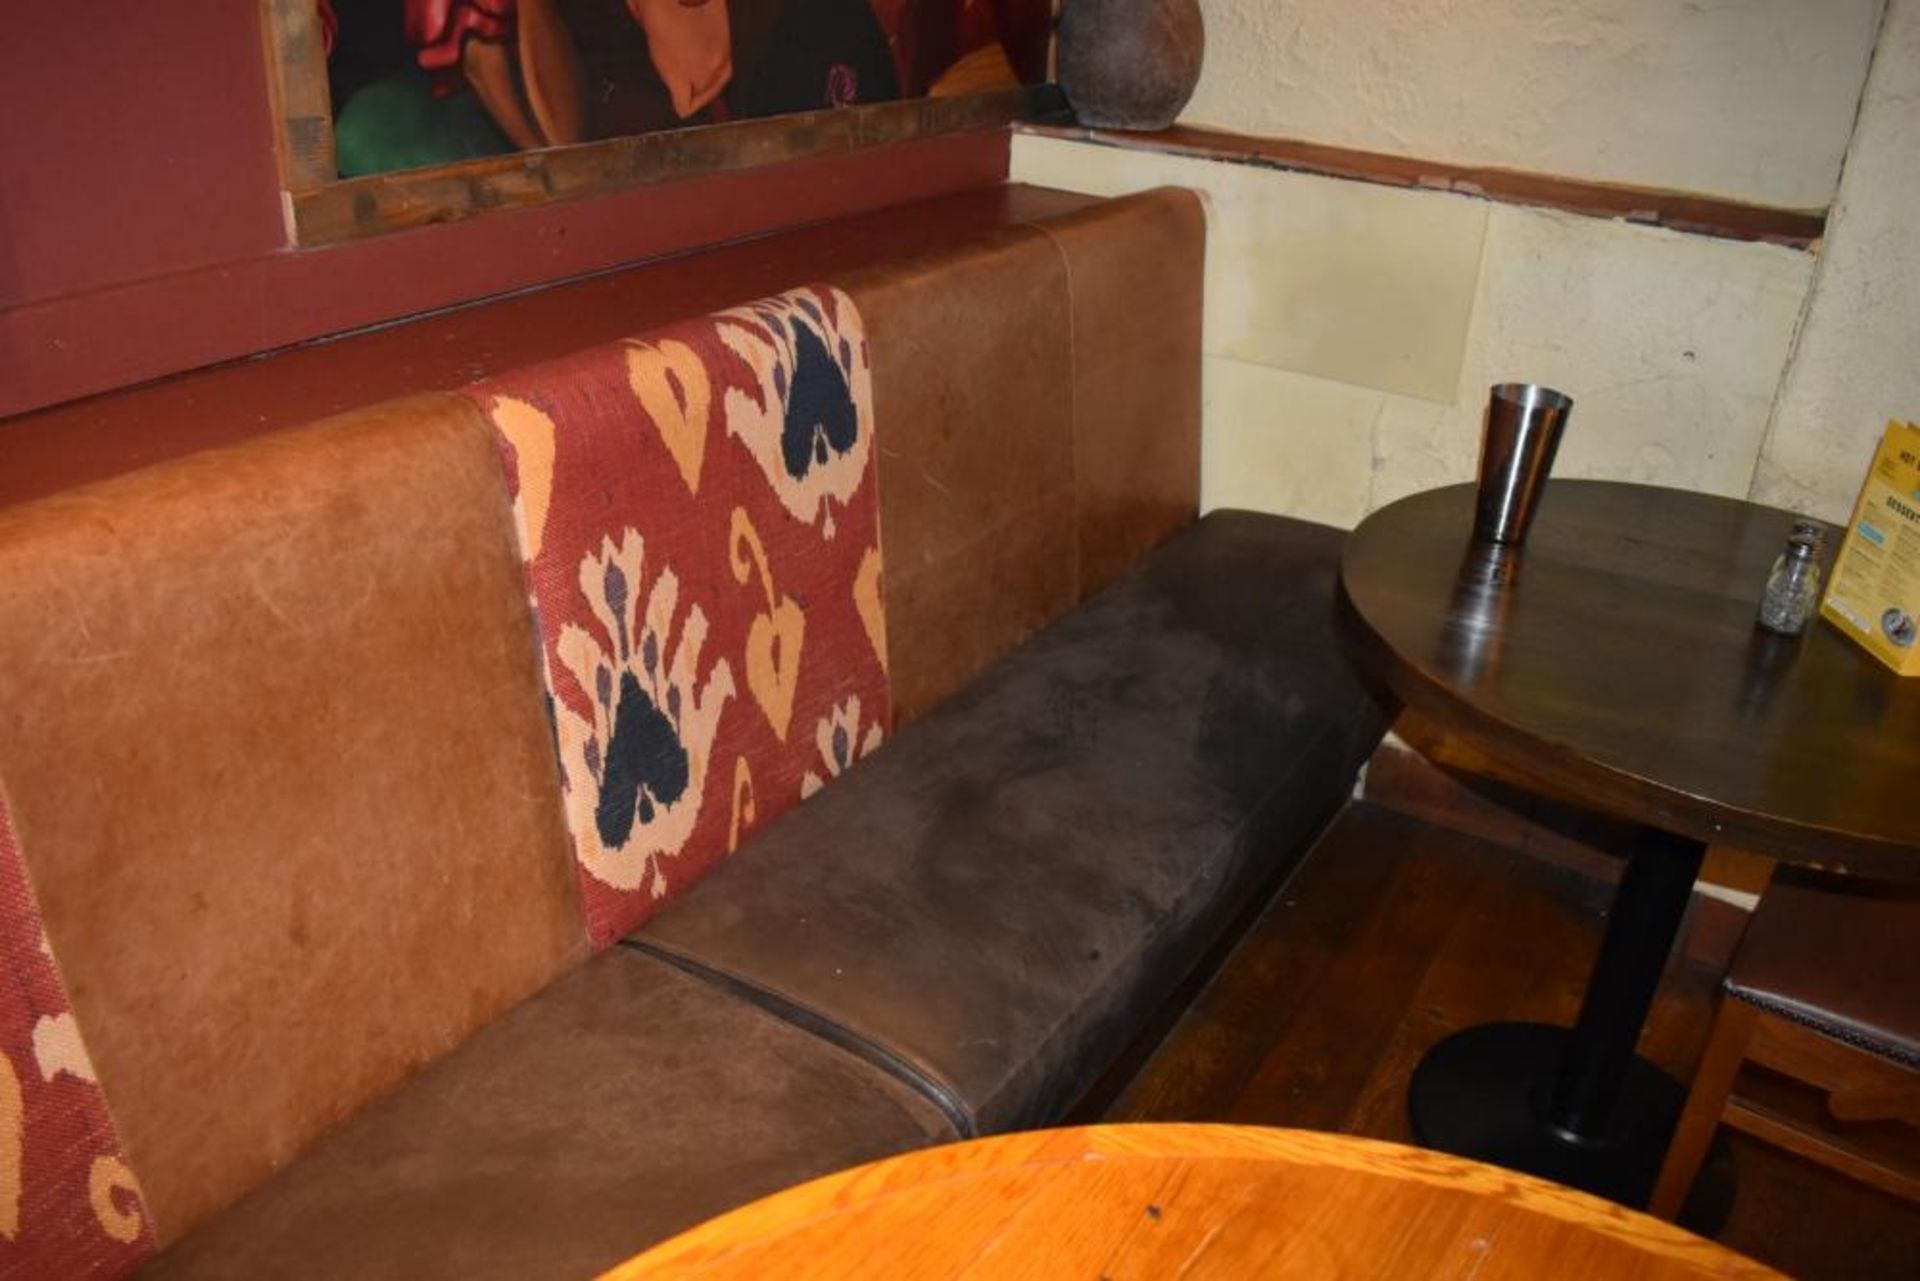 1 x Long Seating Bench From Mexican Themed Restaurant - CL461 - Ref PR889 - Location: London W3 - Image 2 of 7